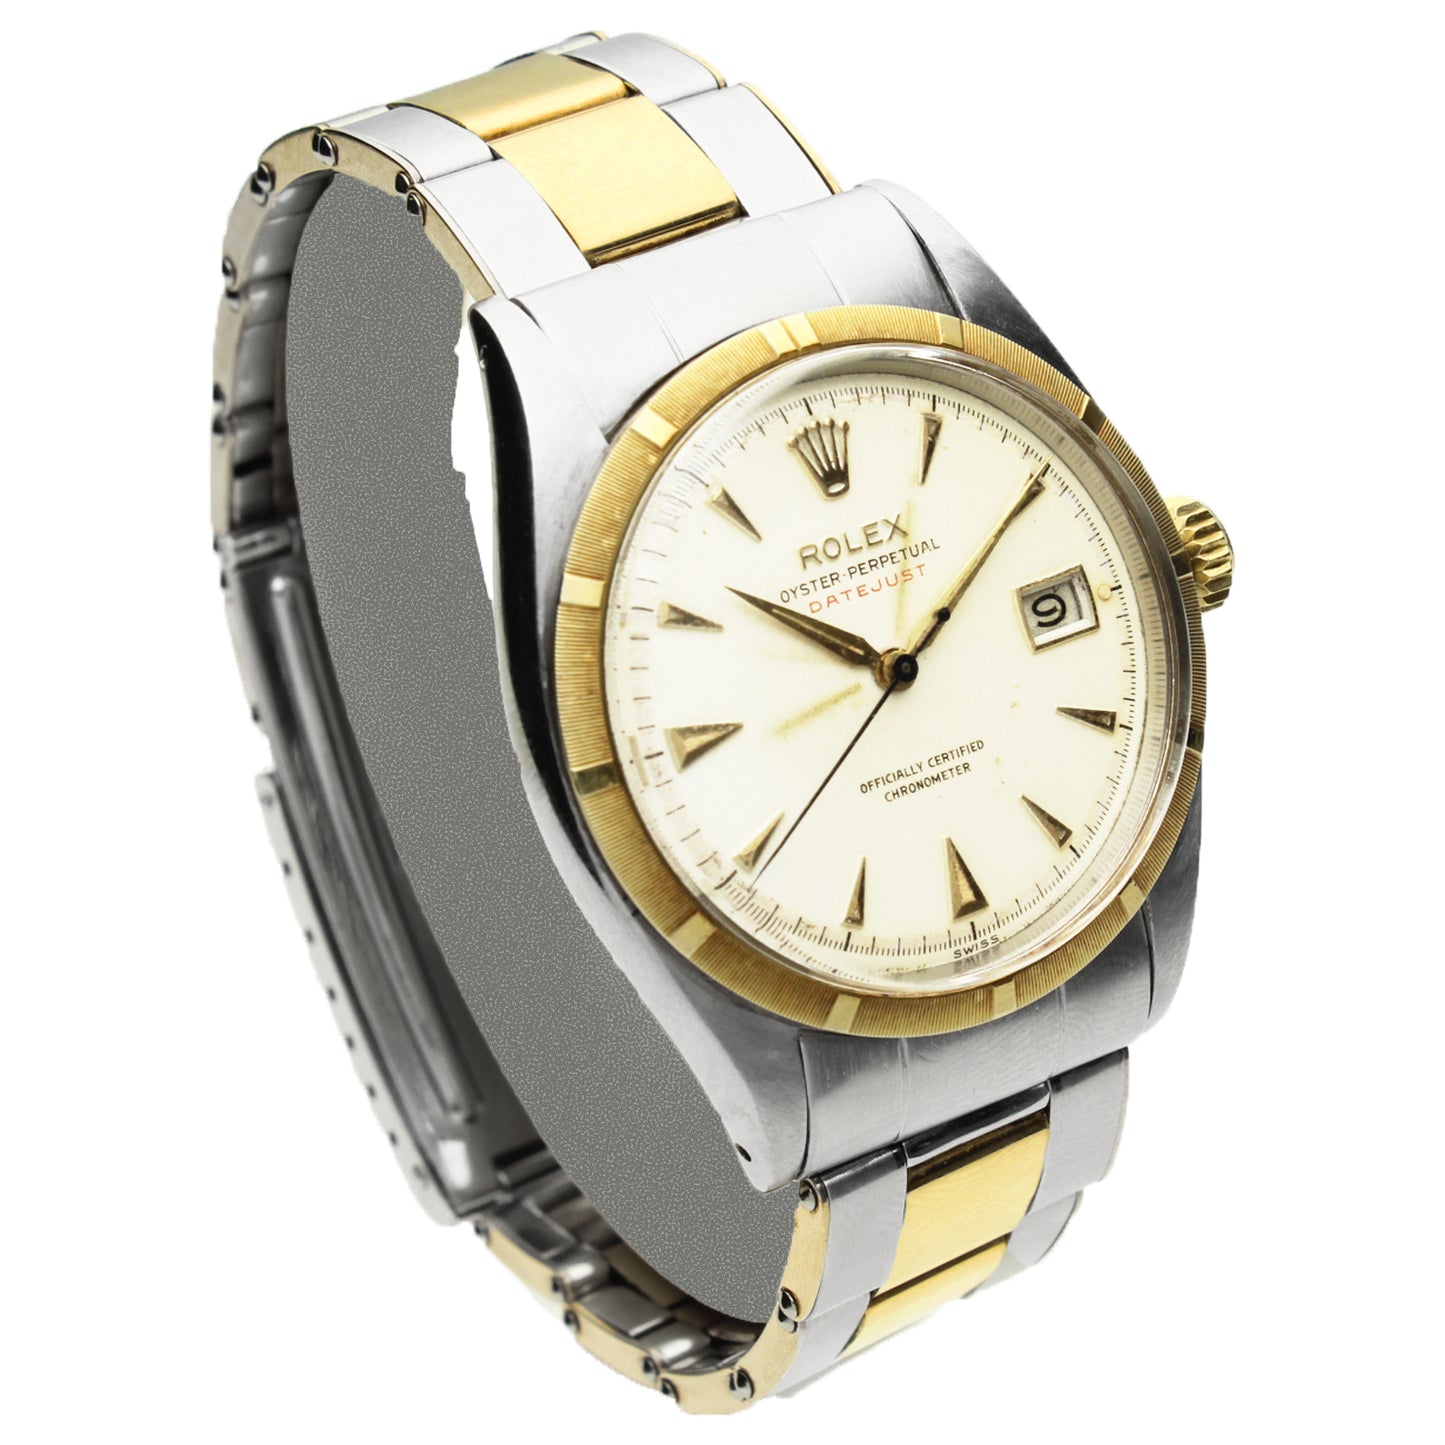 Stainless steel & 18ct yellow gold Rolex Datejust Oyster Perpetual wristwatch. Made 1950